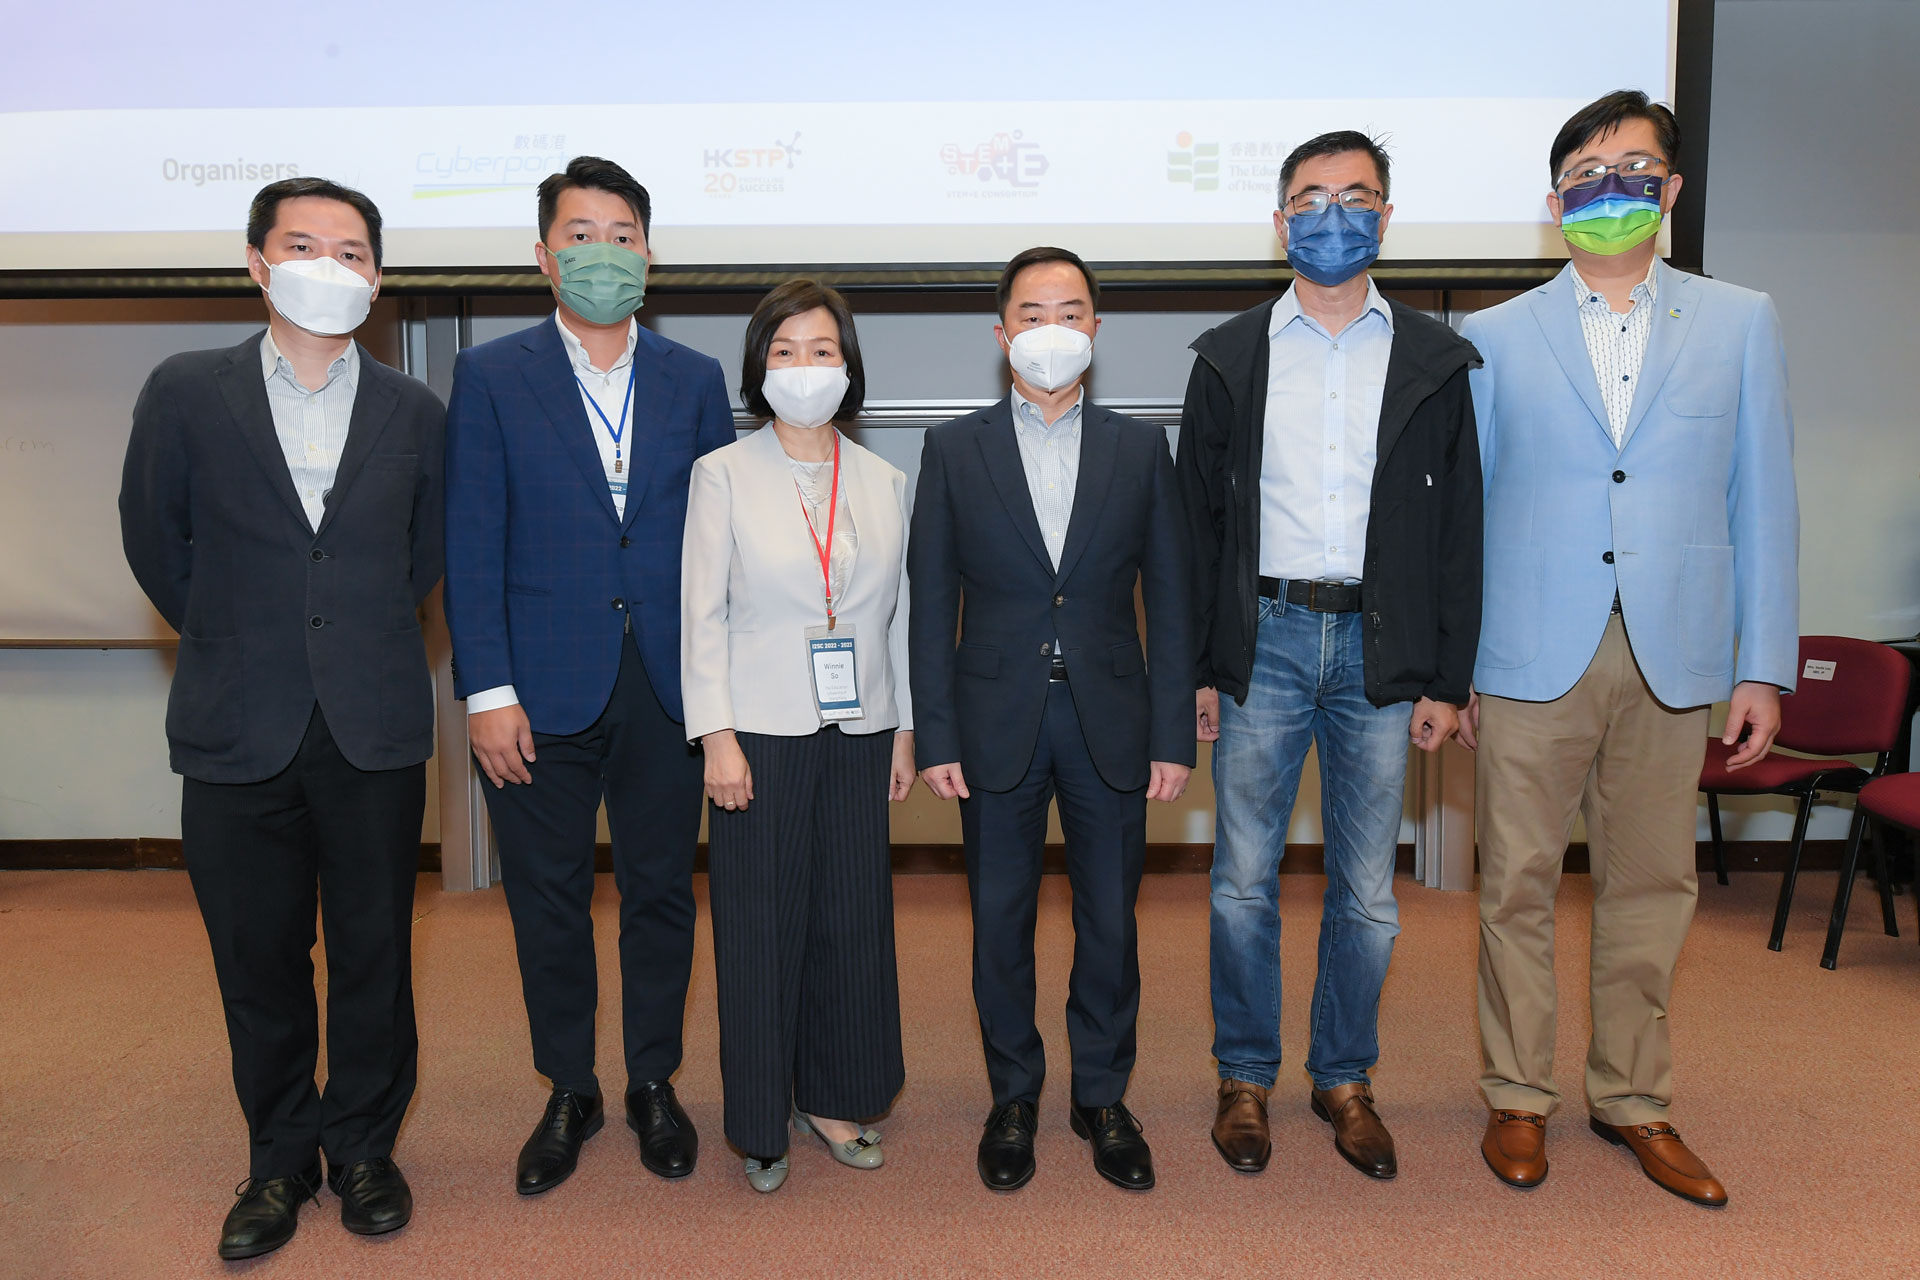 Mr. Tony Wong, Deputy Government Chief Information Officer (3rd right), Ir. Eric Chan, Chief Public Mission Officer, Cyberport (rightmost), and Mr. Michael Au, Assistant Director, Partnerships, Science Parks (2nd left), in group photo with guests.